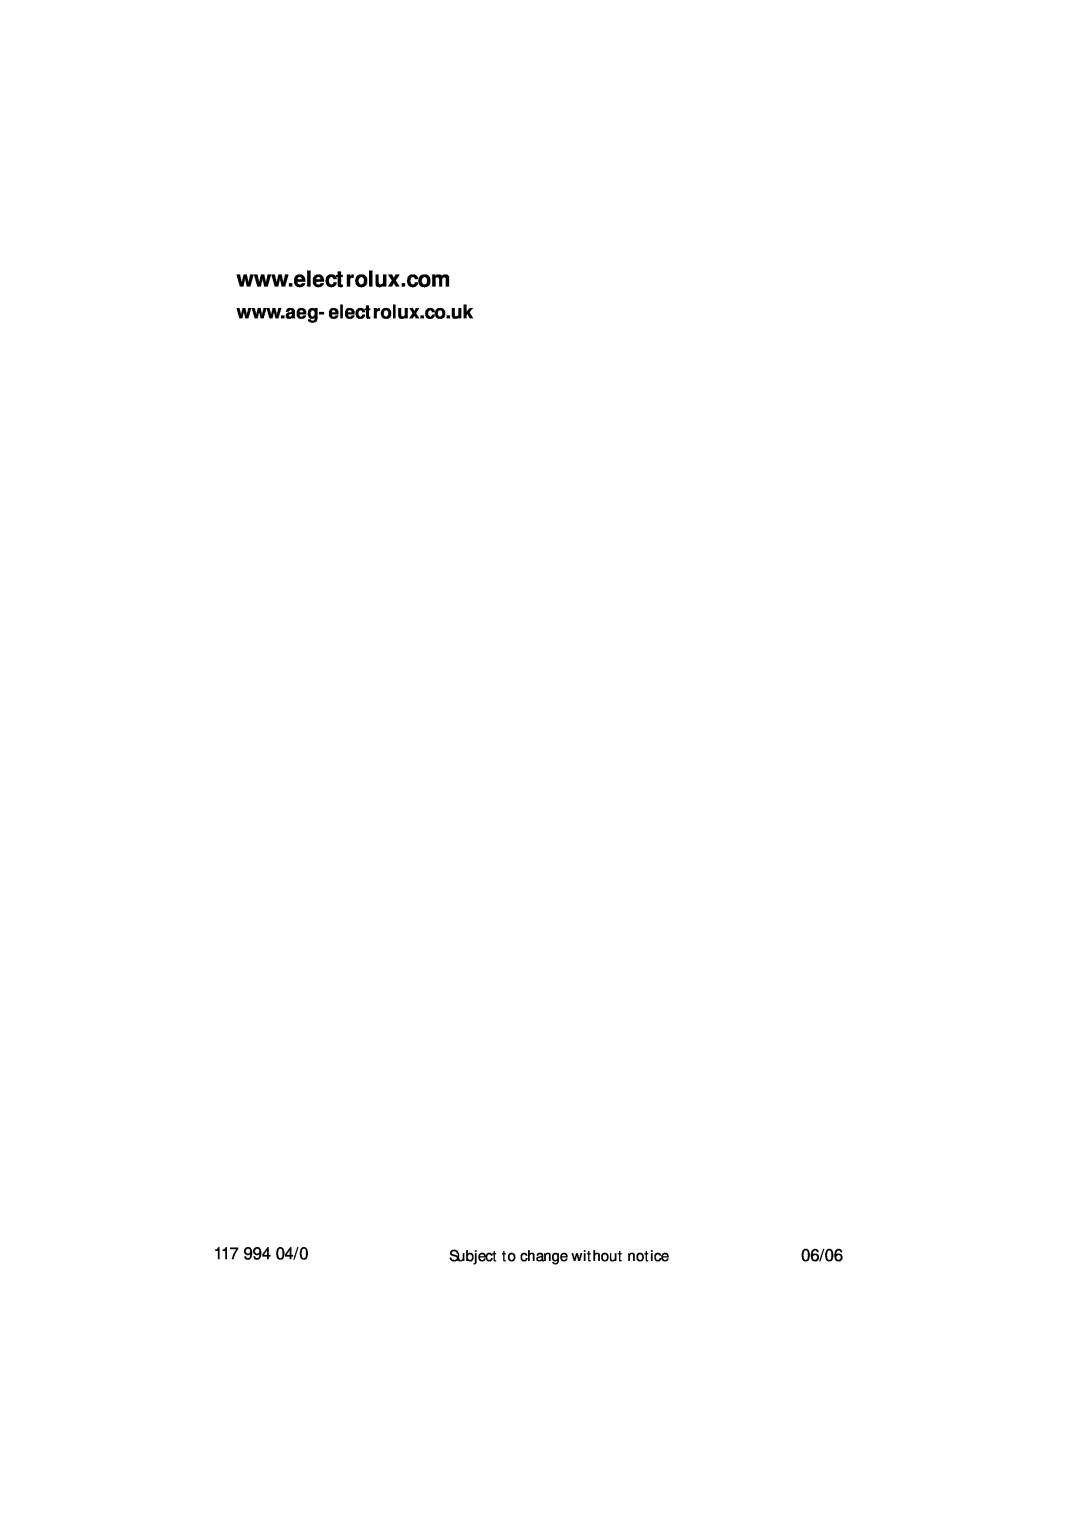 Electrolux U30205 manual 06/06, Subject to change without notice 